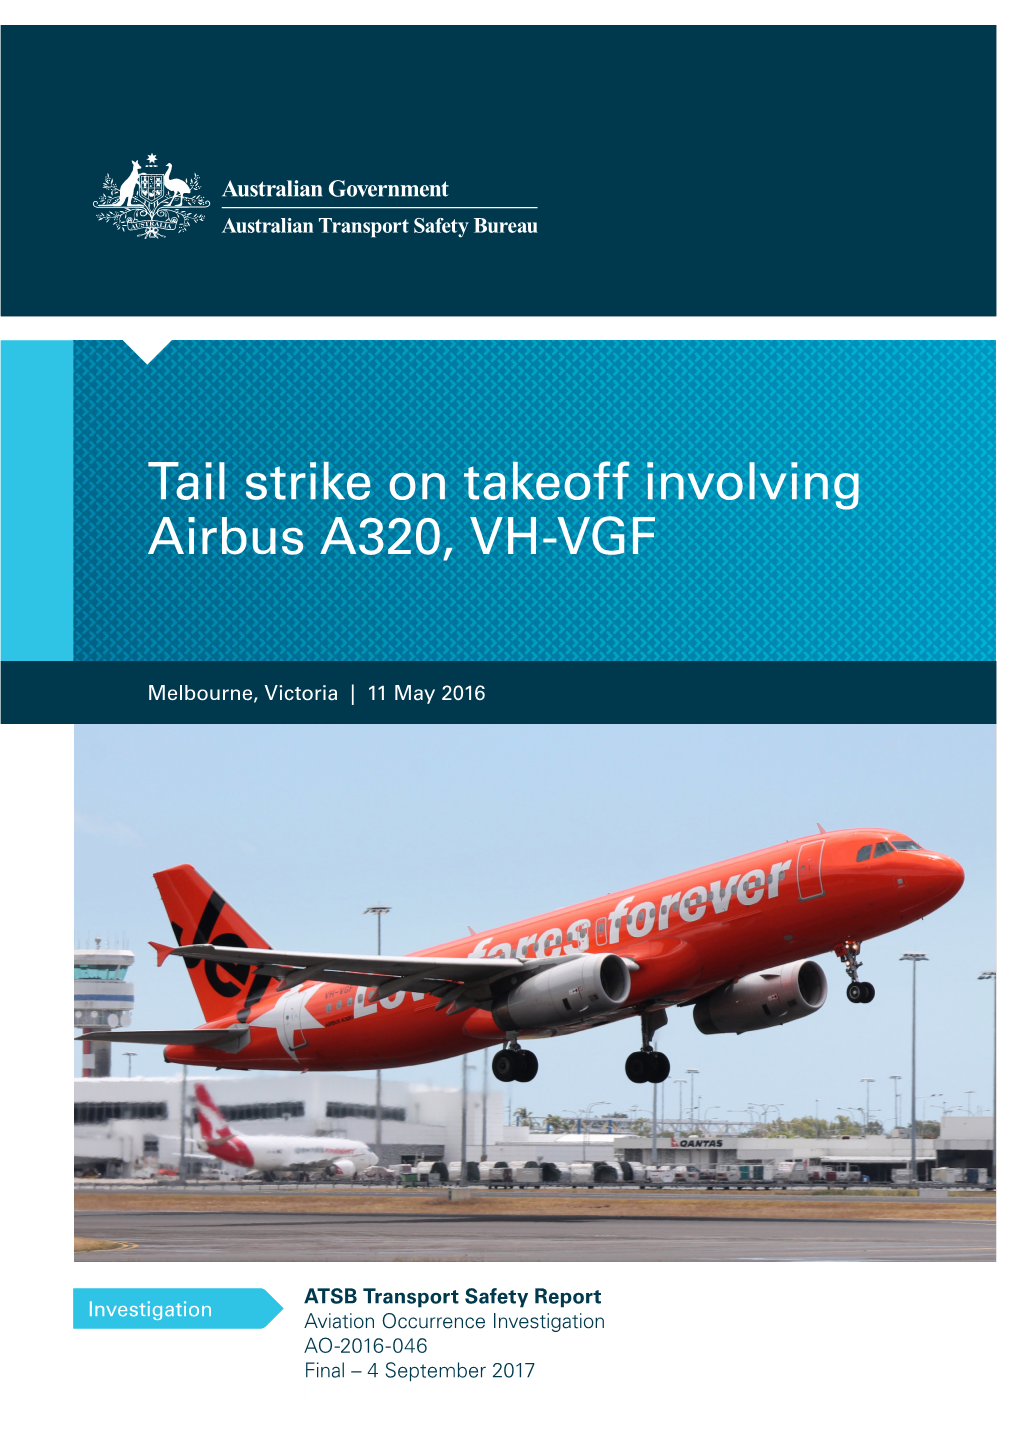 Tail Strike on Takeoff Involving Airbus A320, VH-VGF Melbourne, Victoria, 11 May 2016